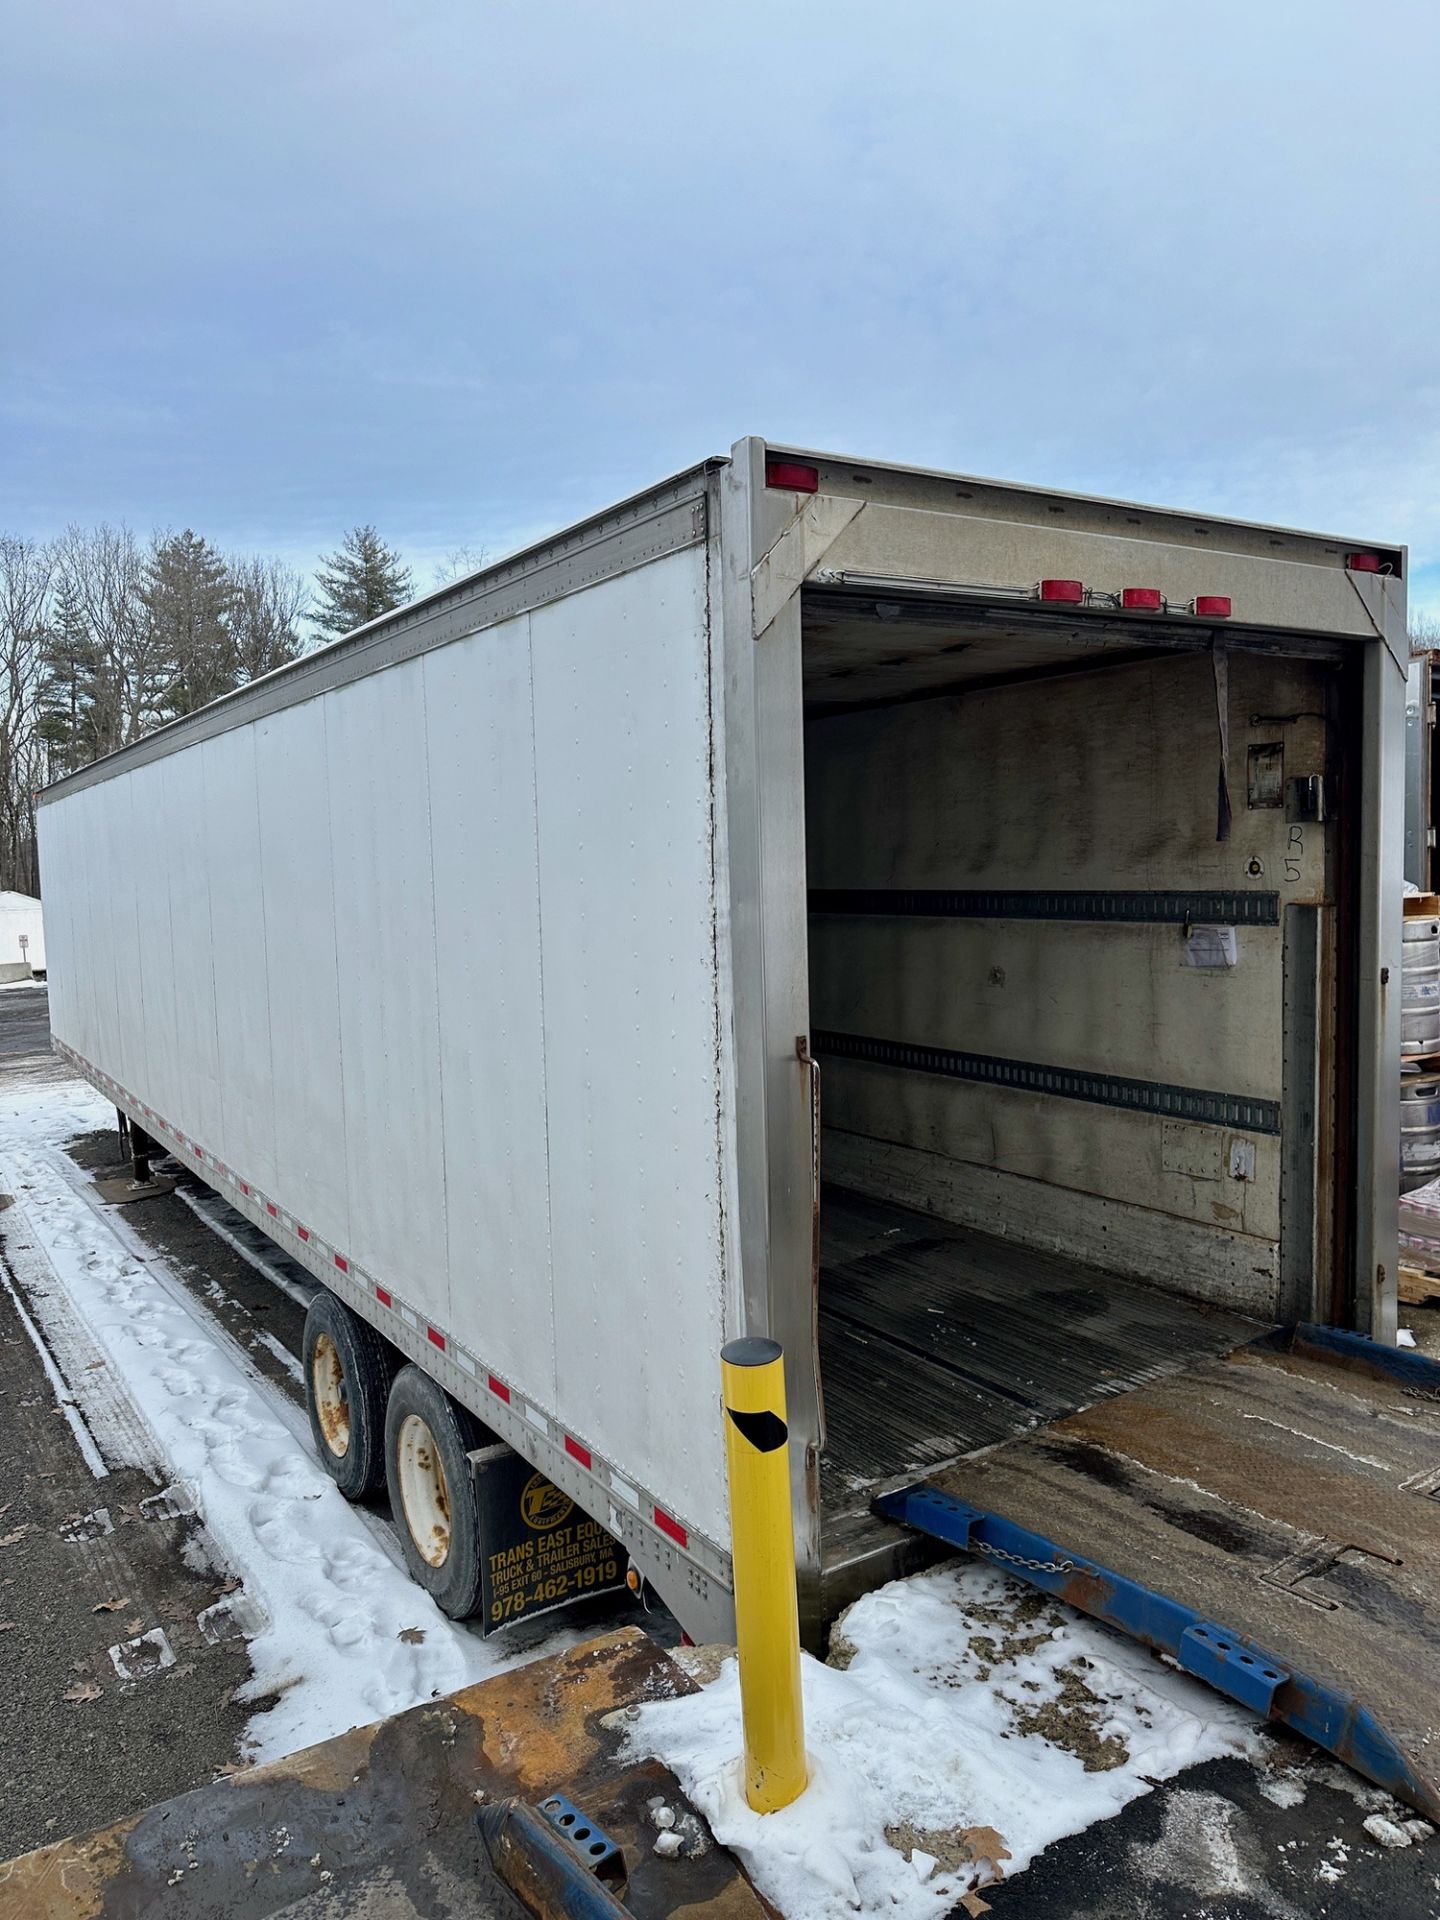 45' Semi Trailer with Thermo King Whisper Reefer Unit - 13'6" Height (Contents No | Rig Fee By Buyer - Image 5 of 7